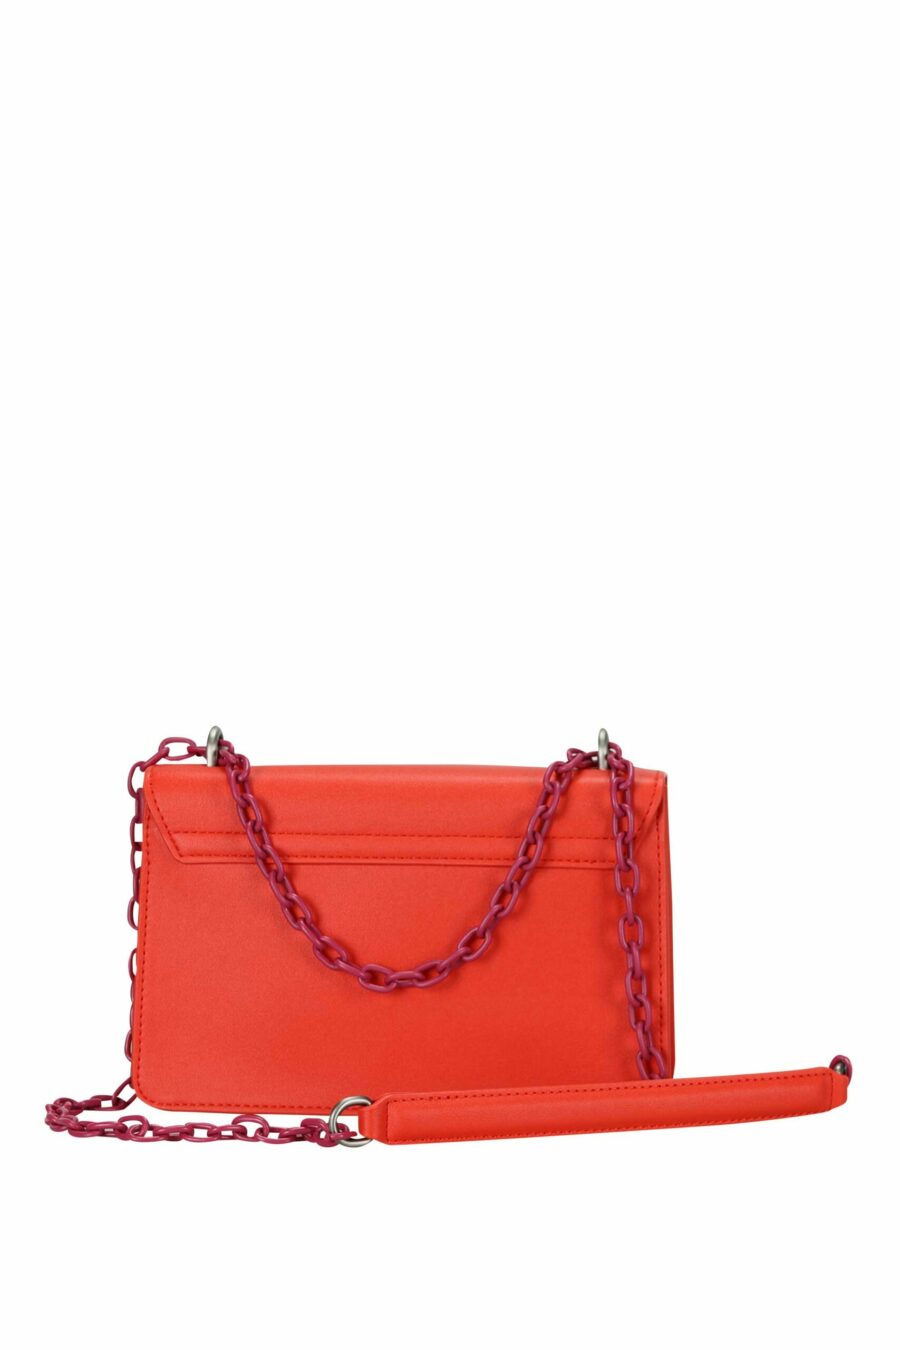 Coral coloured shoulder bag with chain and monochrome circular "c" logo - 8052672642684 2 scaled